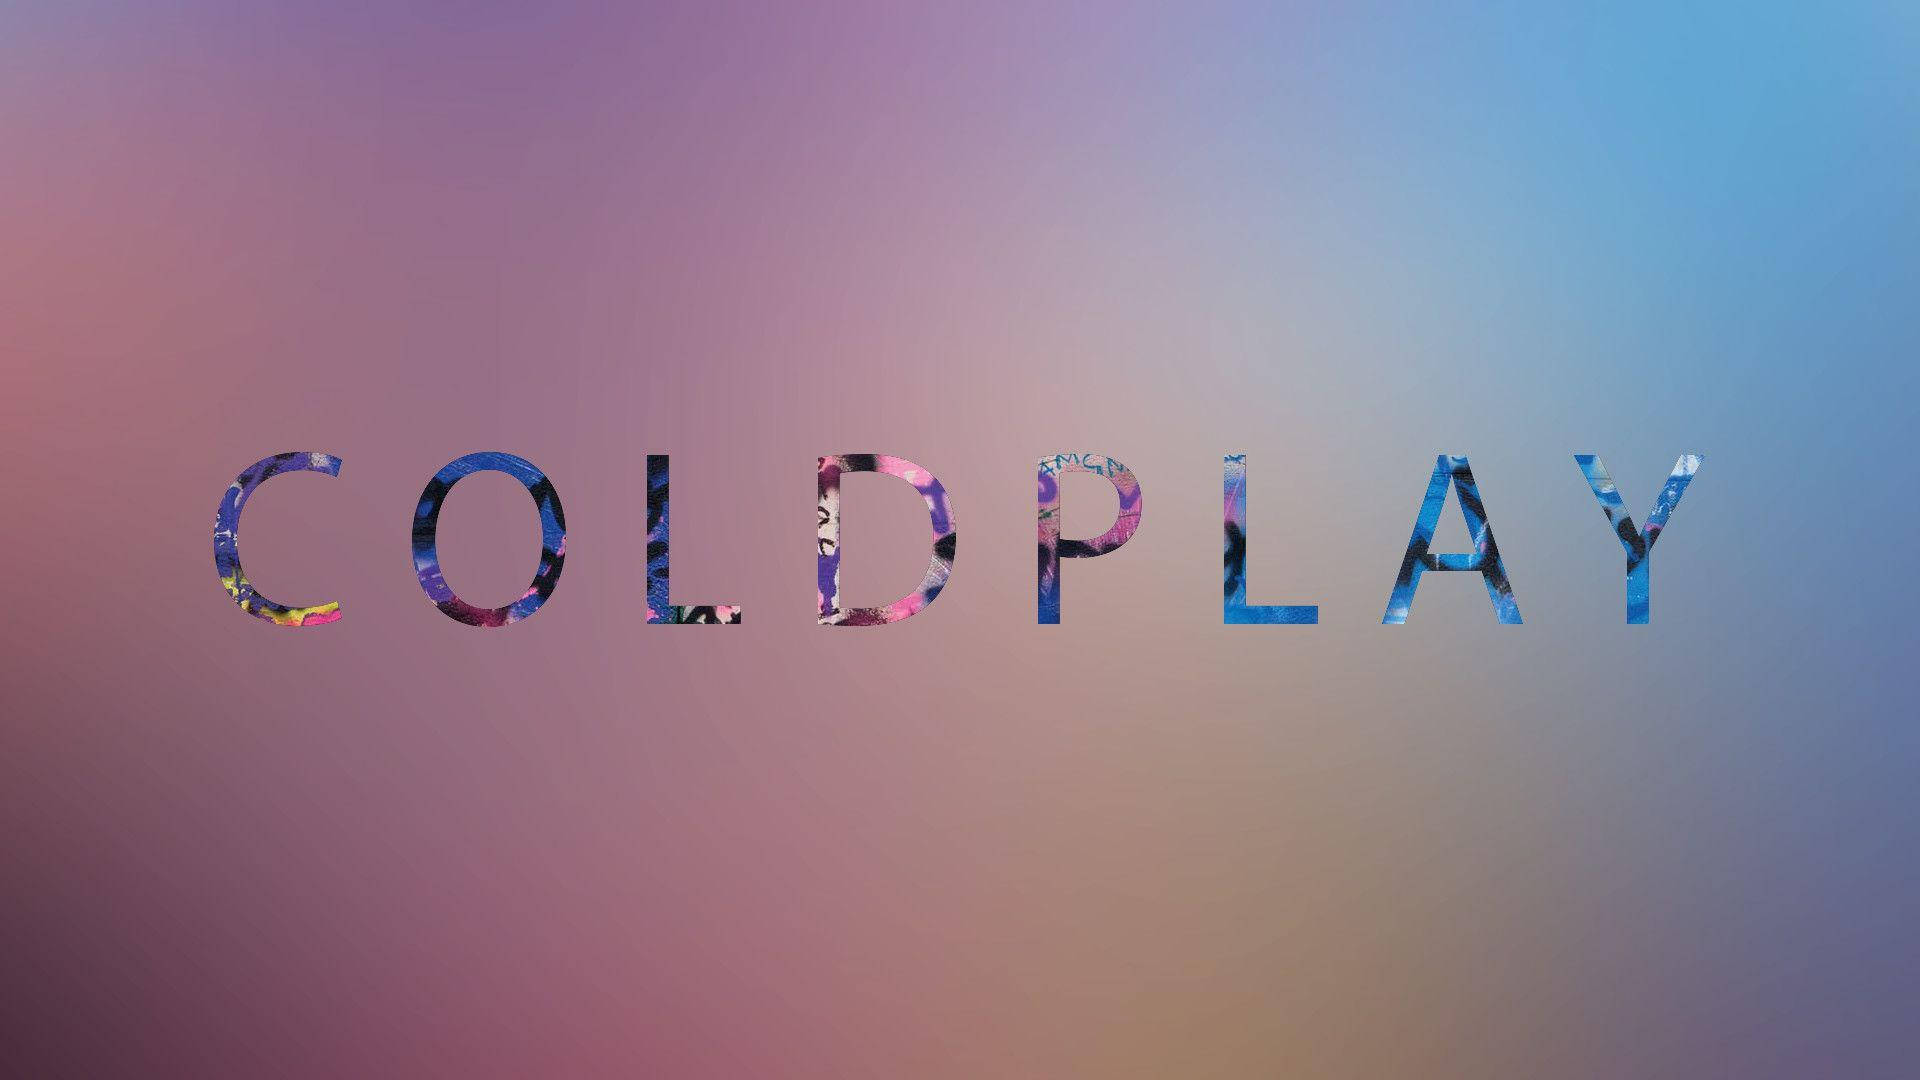 Coldplay Word Mask Art Background